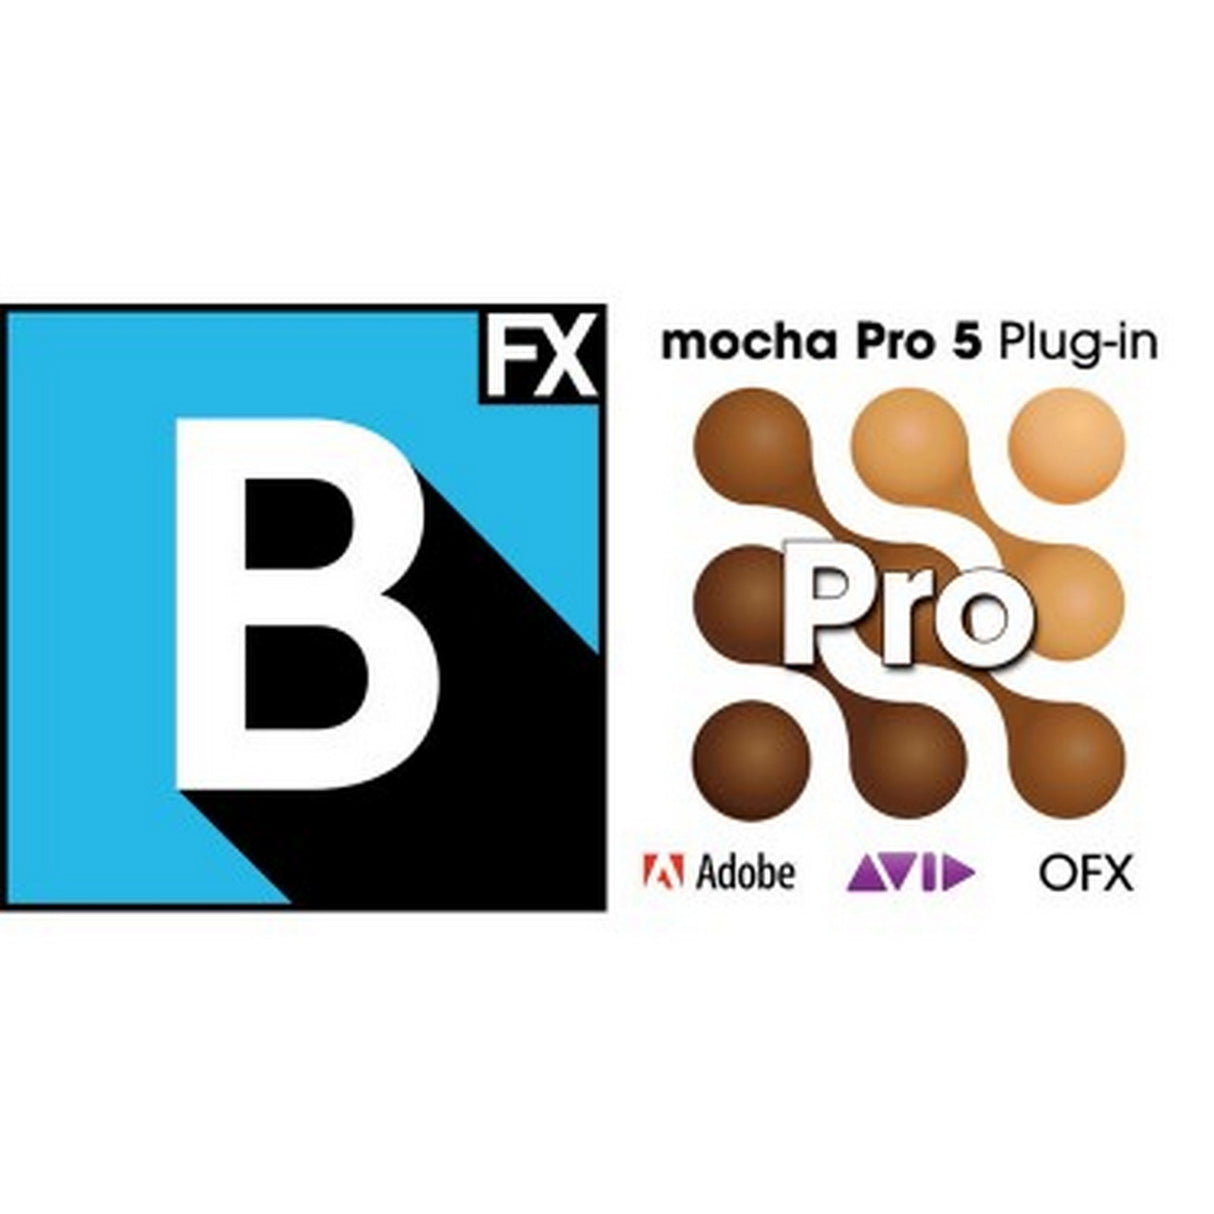 Boris FX Continuum Complete 10 and mocha Pro 5 Bundle | Video Software Adobe Avid and OFX